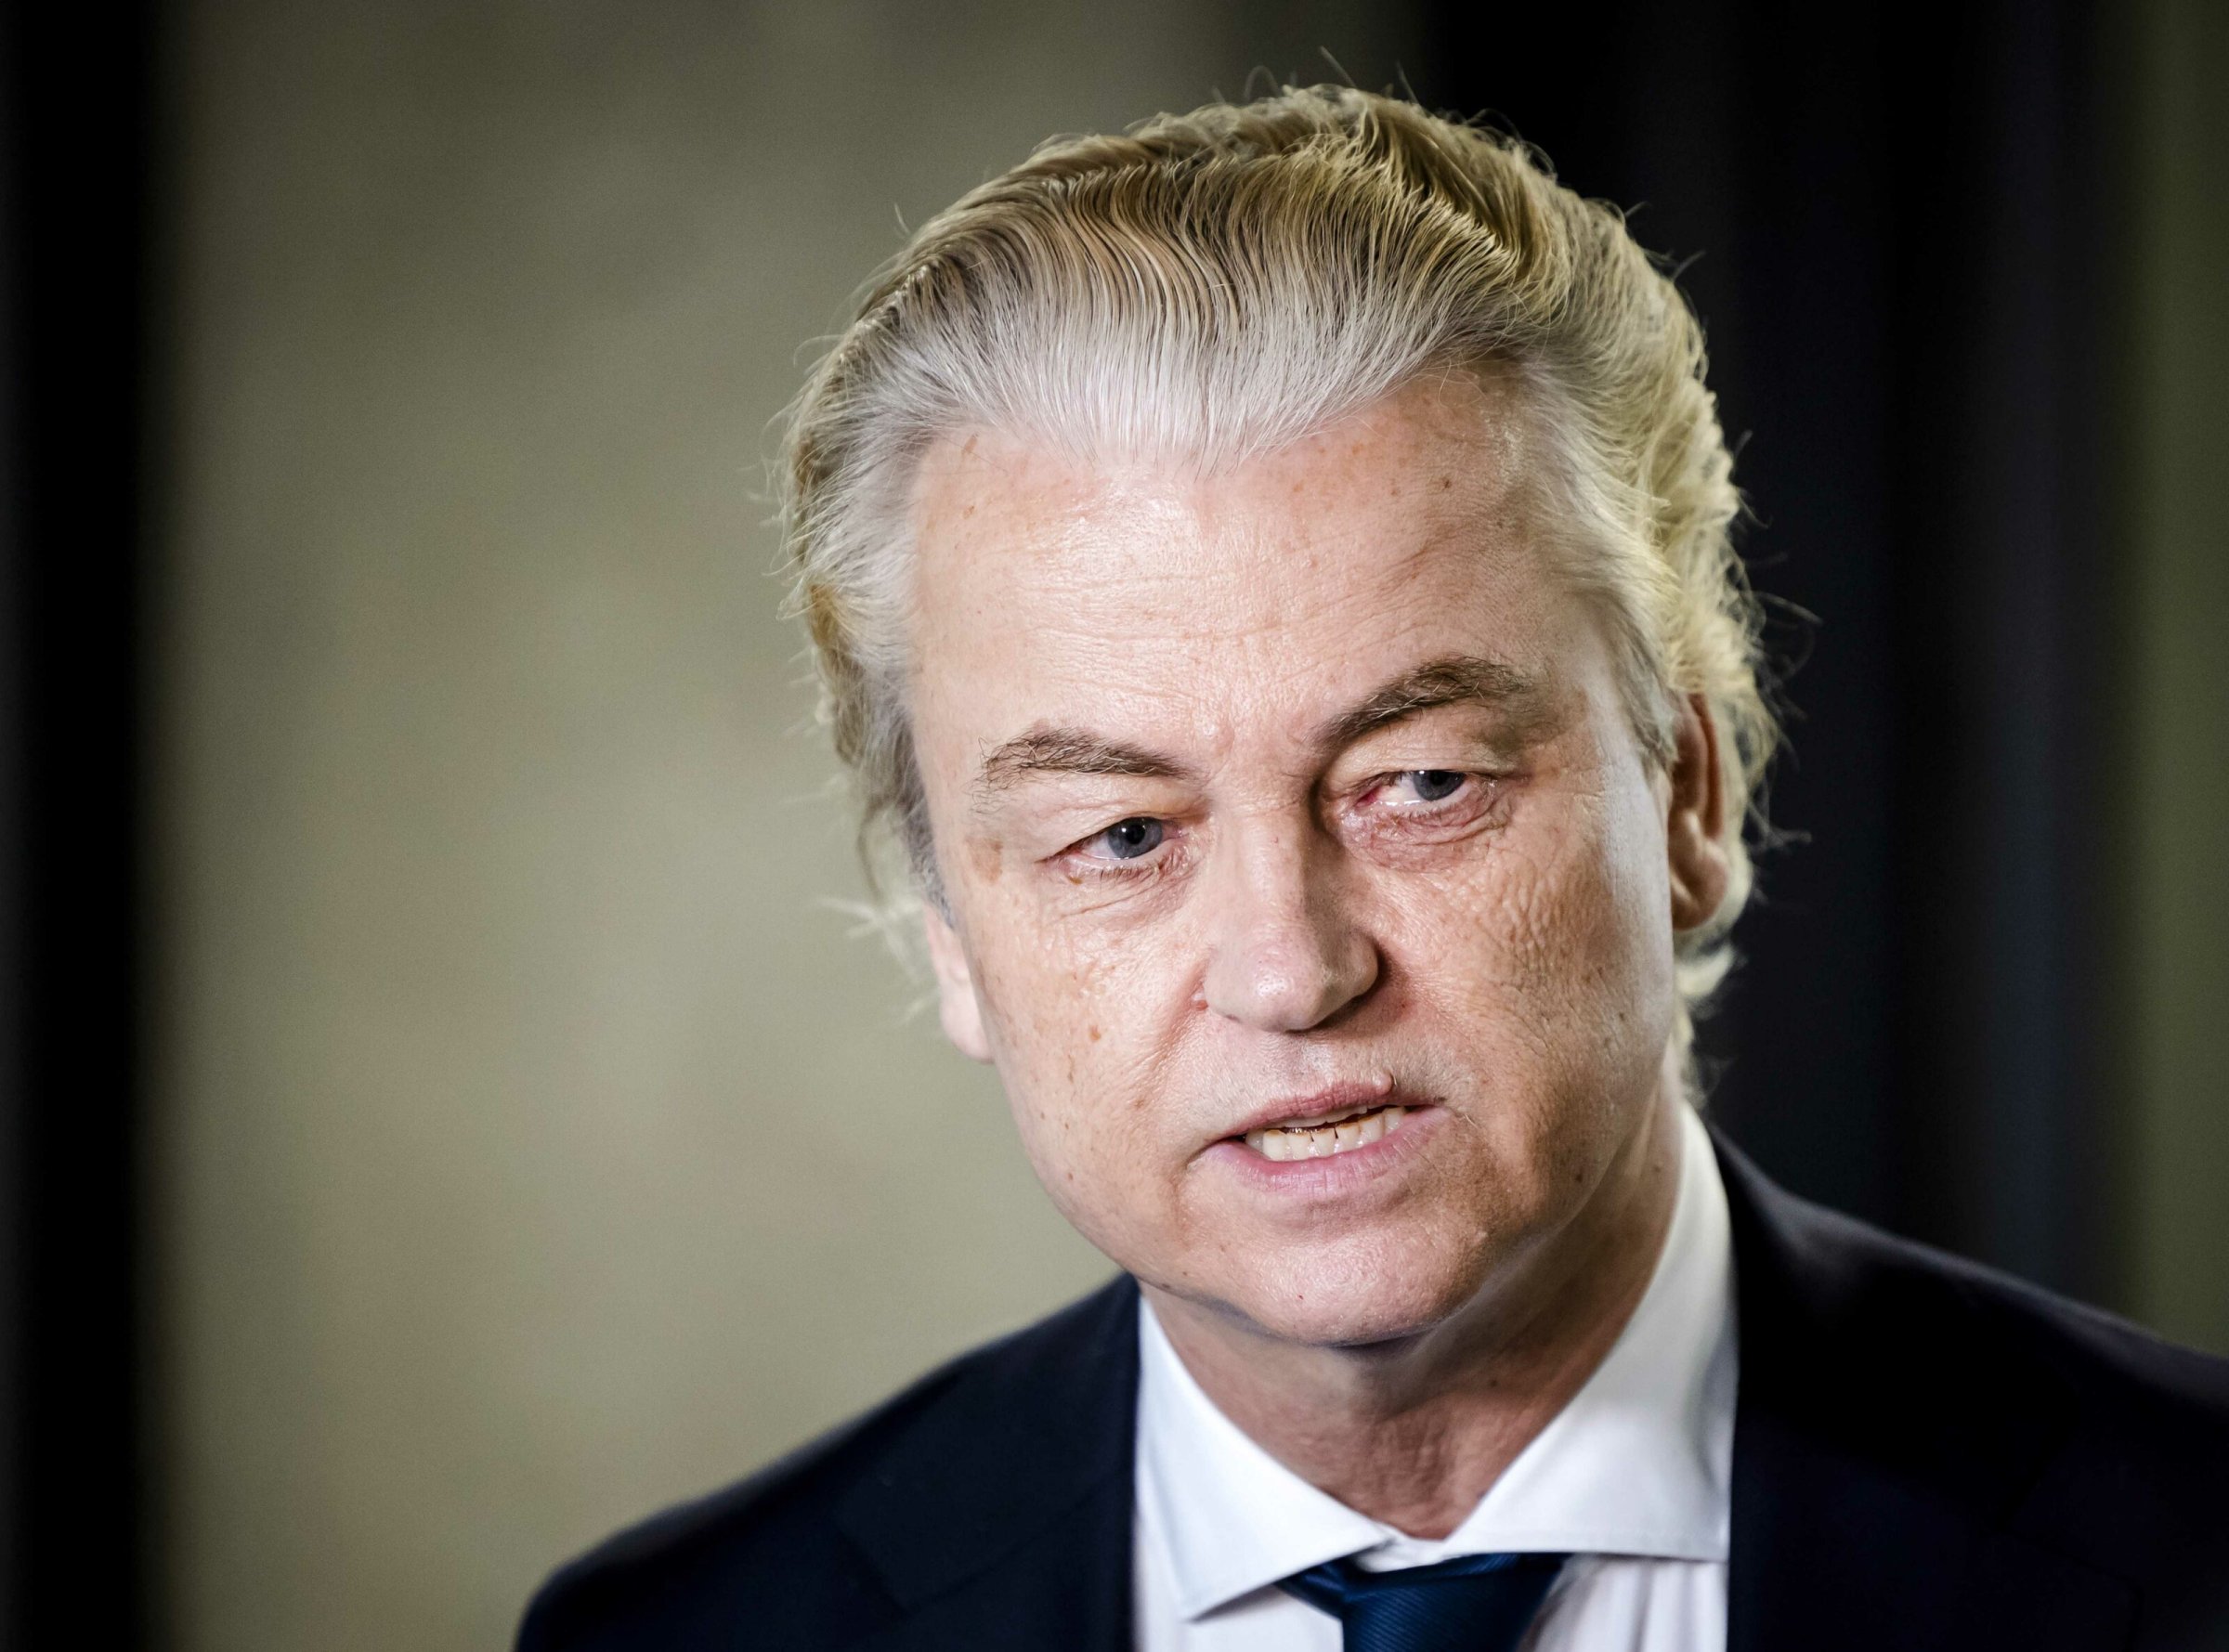 Shift to the correct: Netherlands: Geert Wilders on the heart of energy